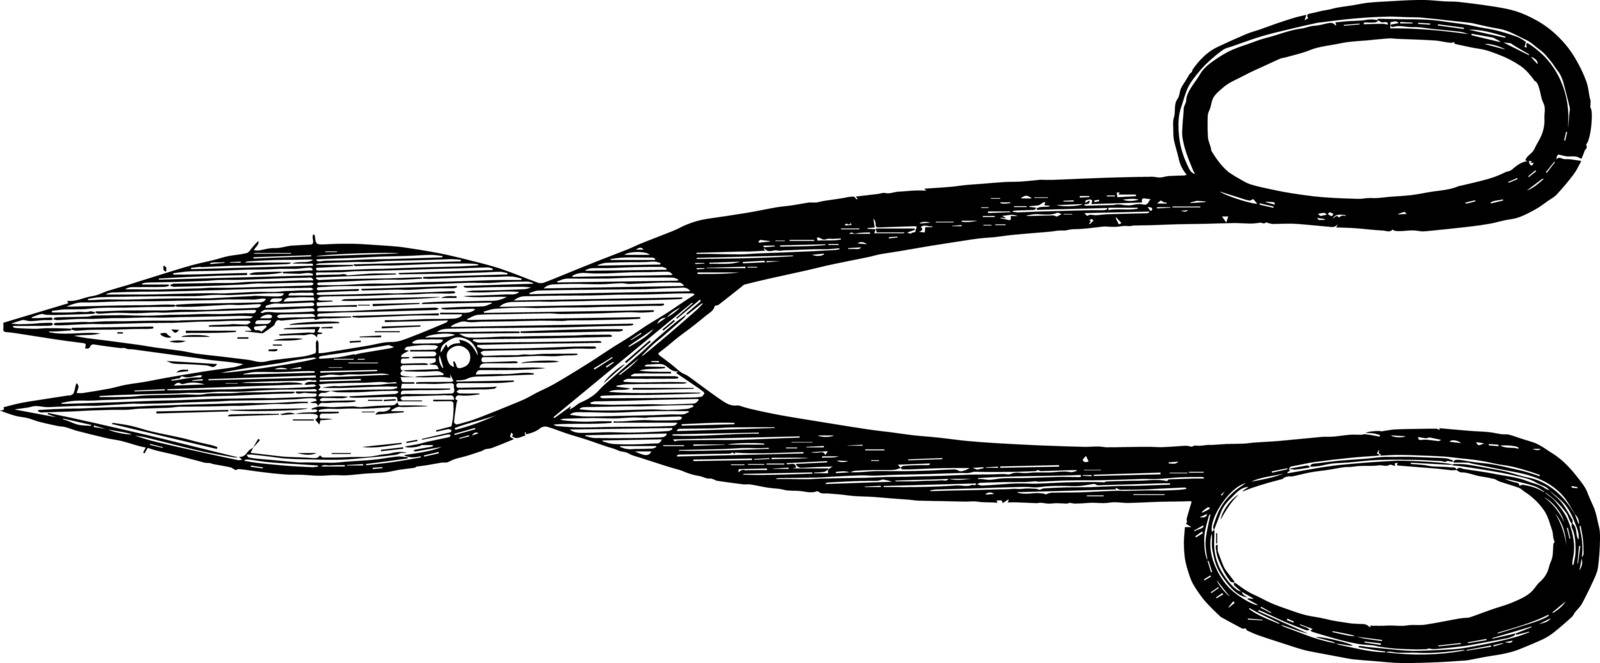 This illustration represents a Pair of Scissors which consist of a pair of metal blades vintage line drawing or engraving illustration.